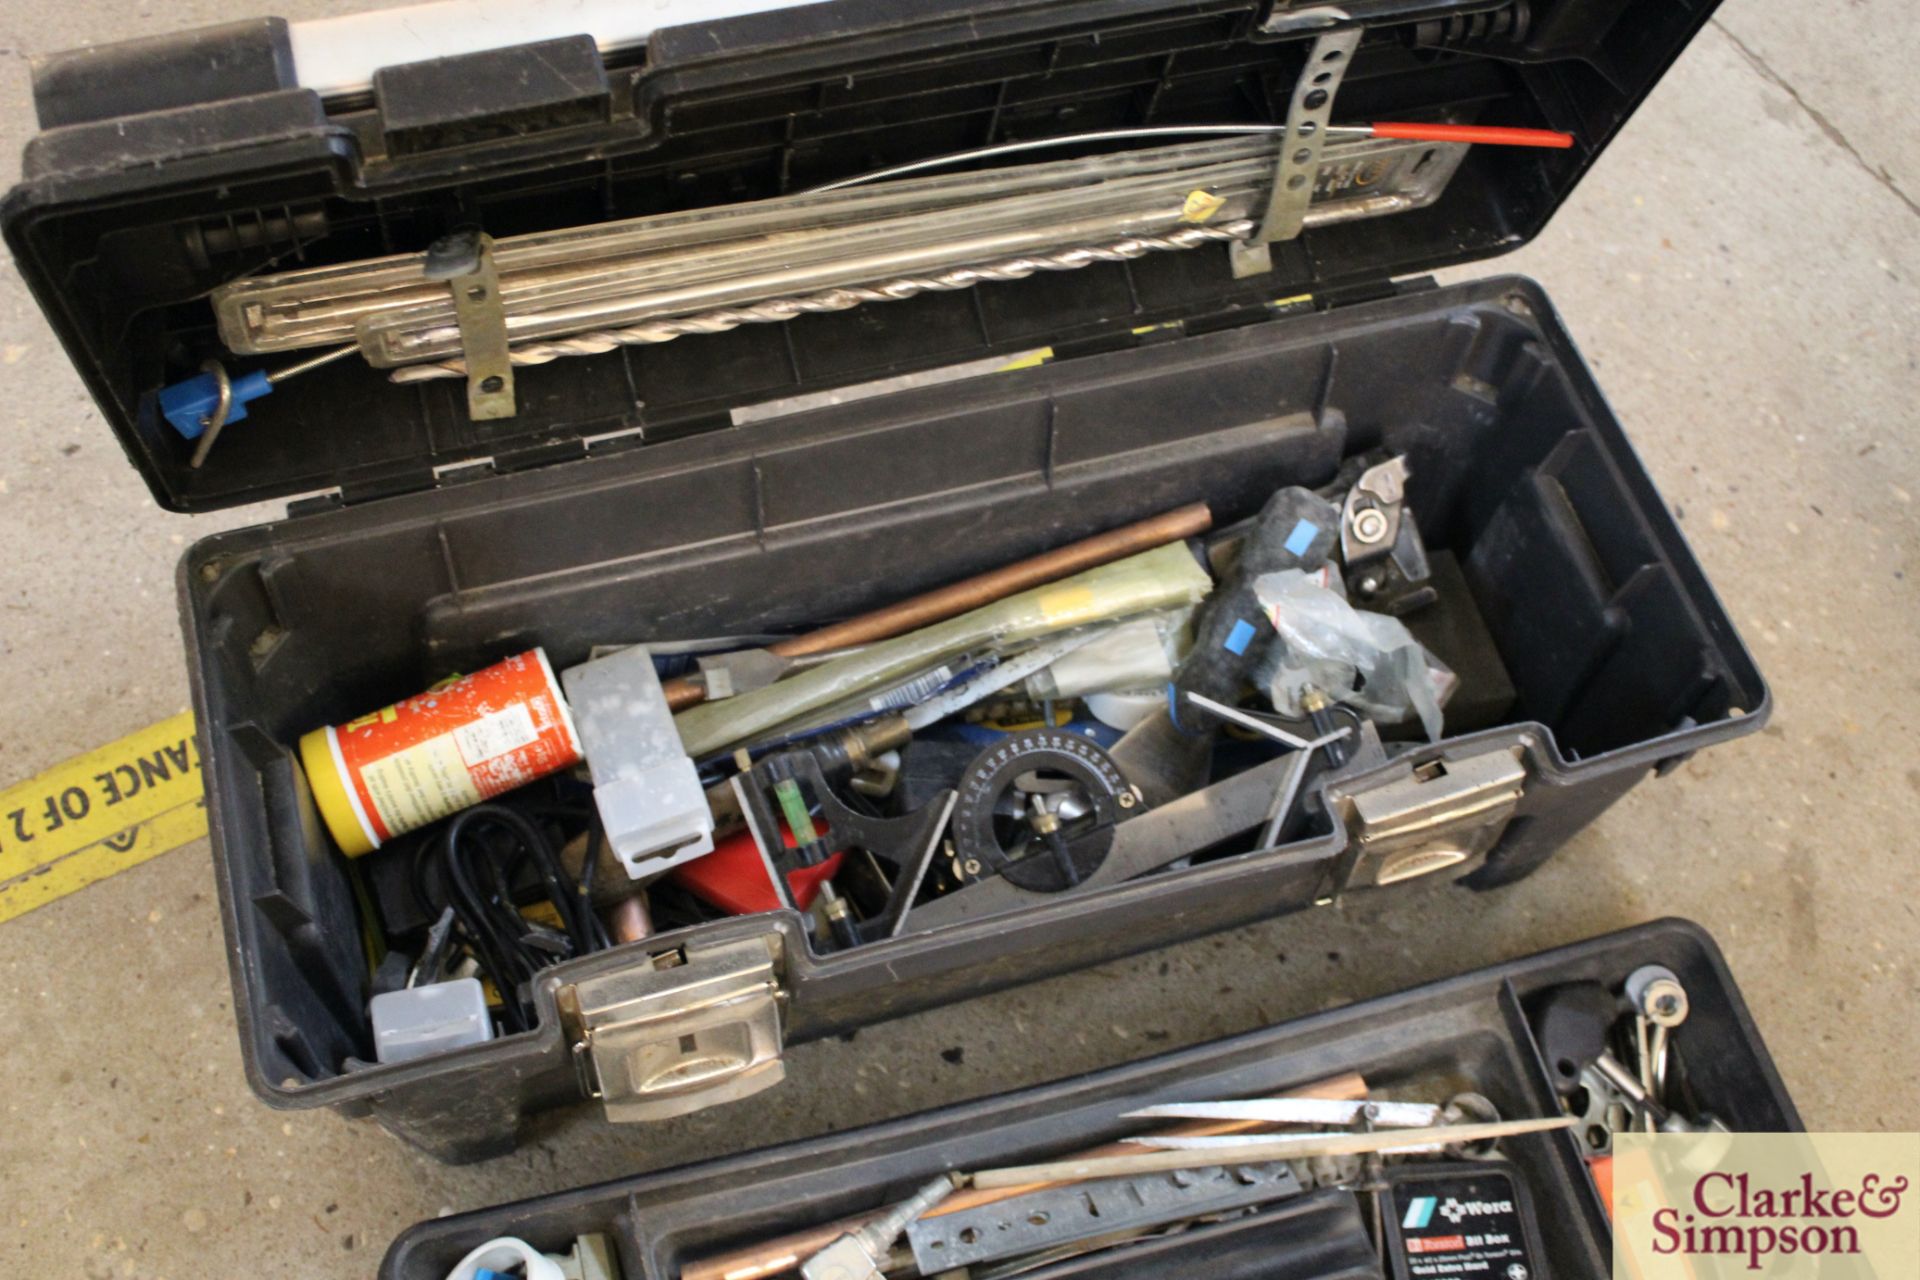 Stanley tool box with contents of tools. - Image 3 of 3